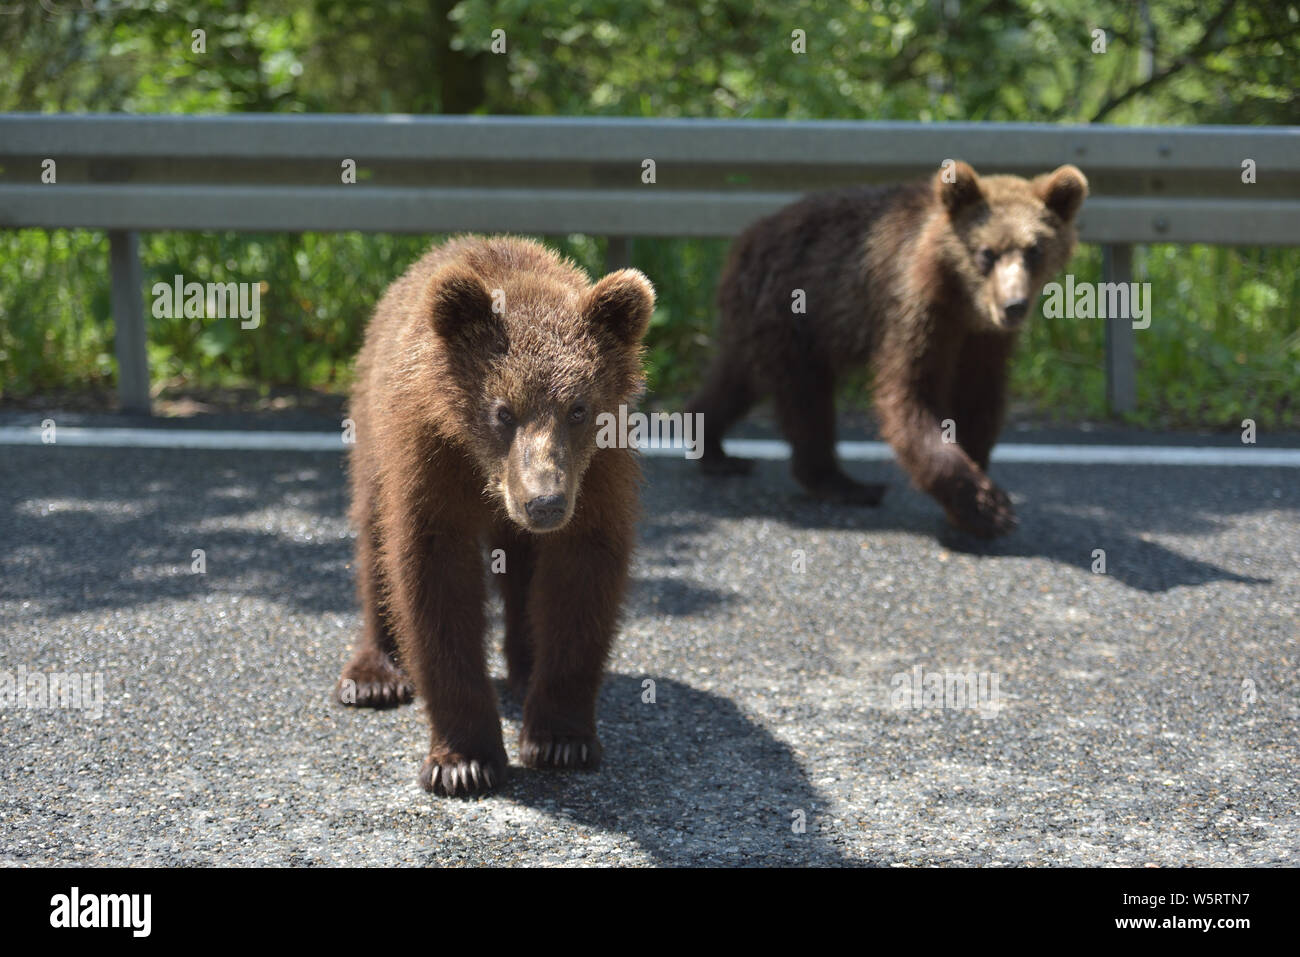 Wild brown bear crossing the street in search for food Stock Photo